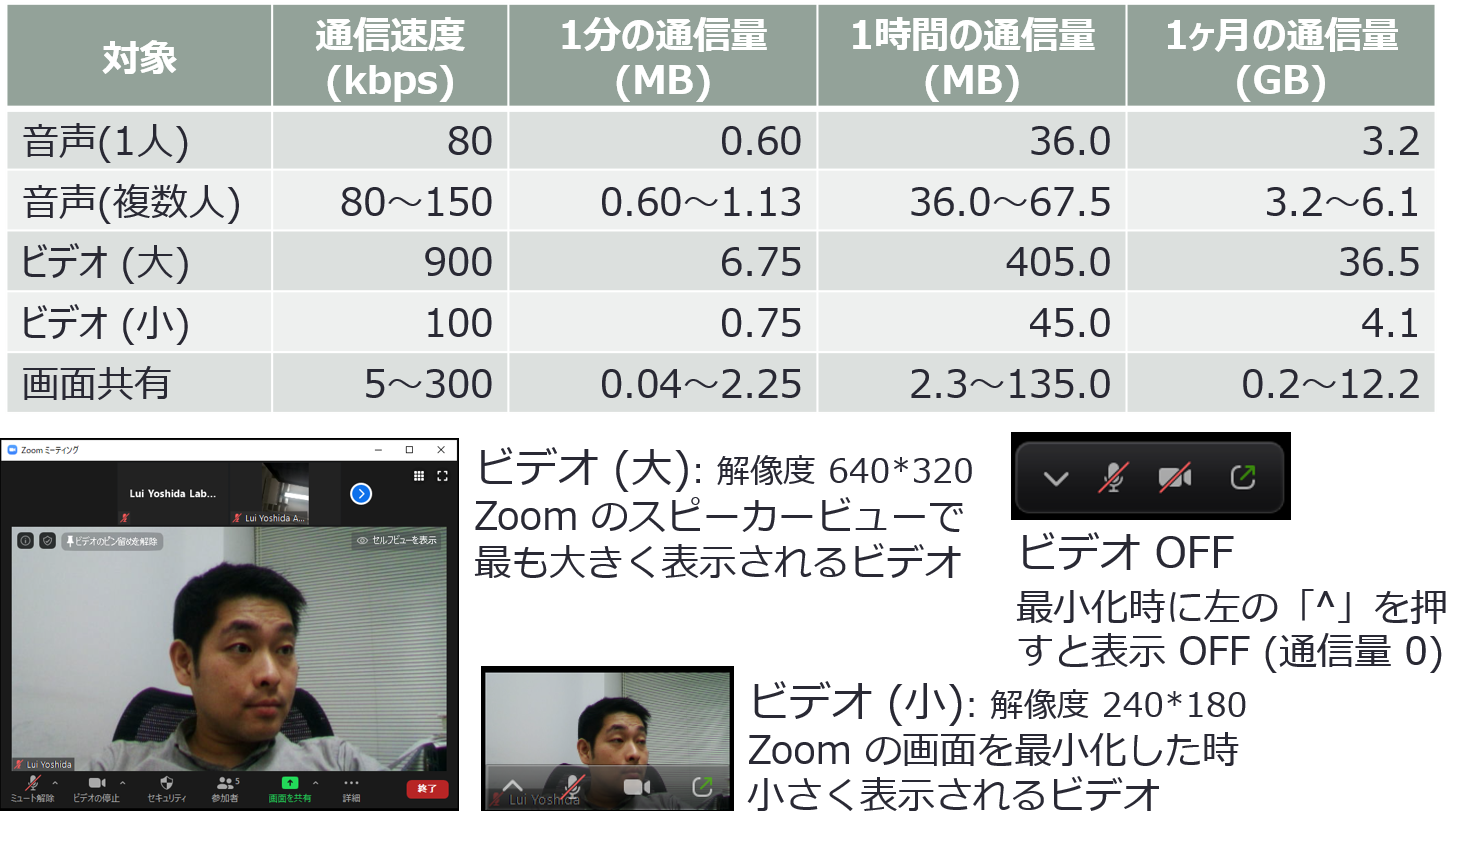 Zoom の通信量